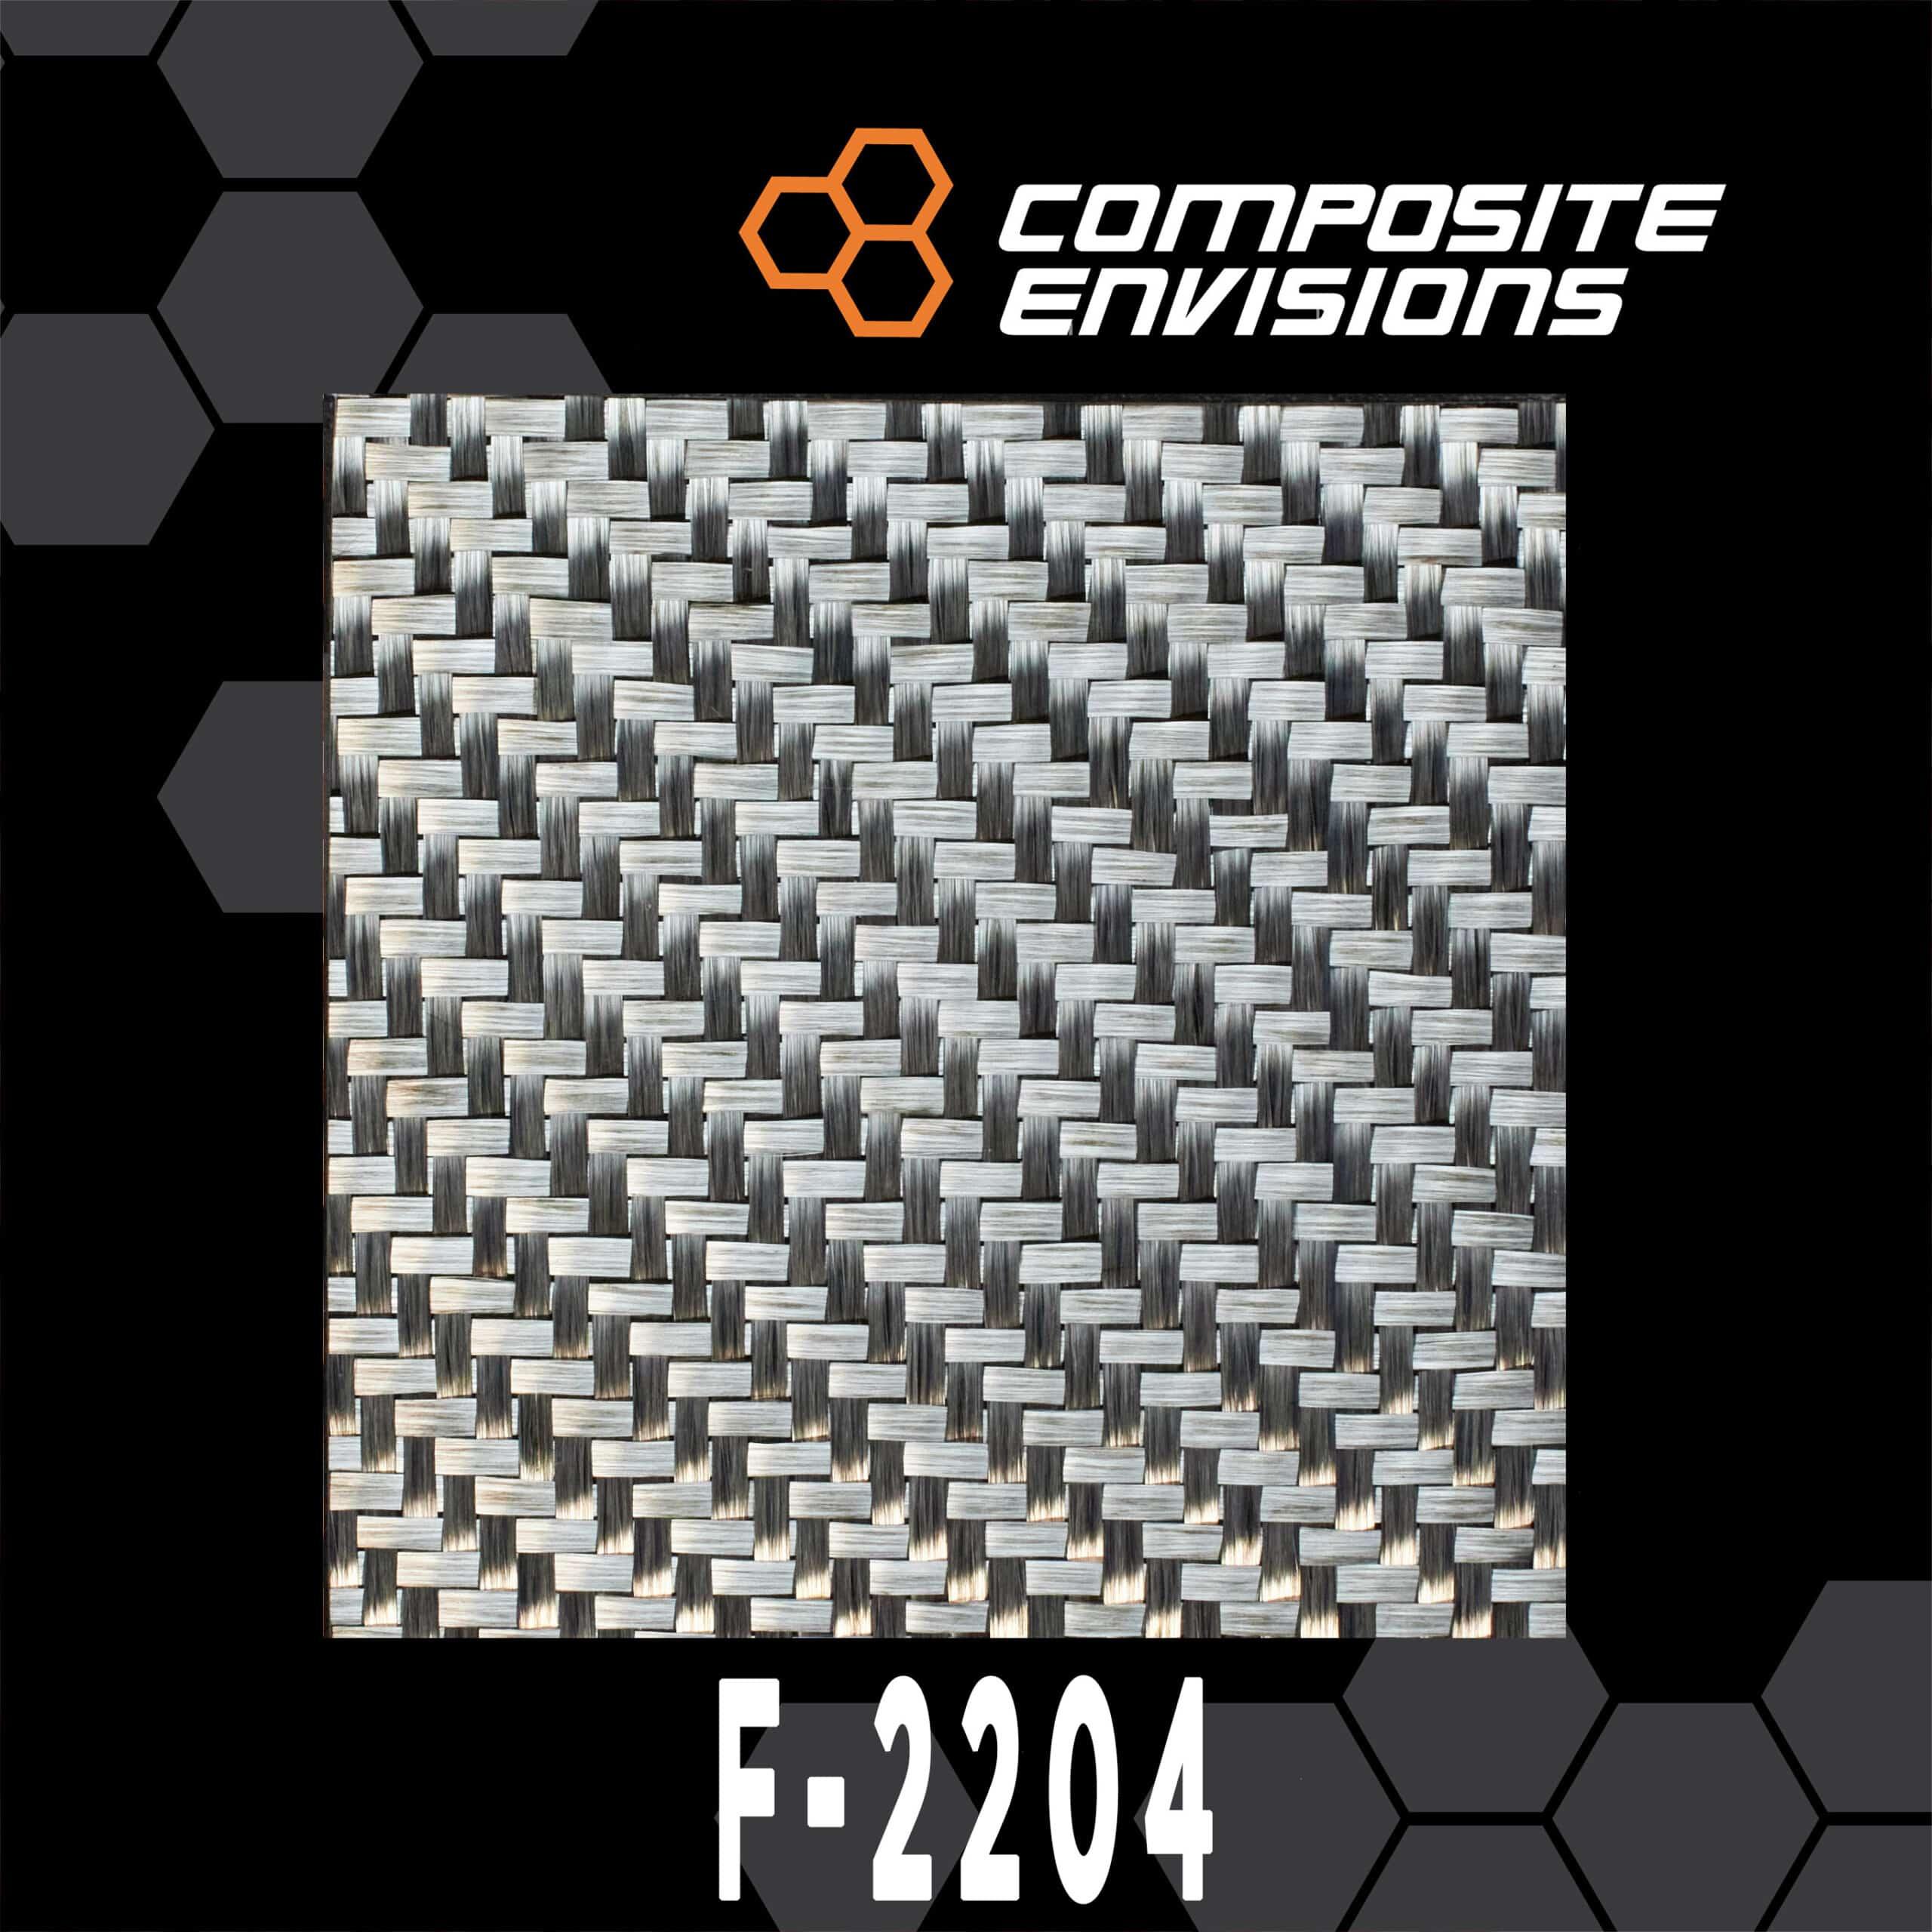 Product Silver Aluminized Carbon Fiber Fabric 2×2 Twill 3k 6oz/203gsm Toray T300-Sample (4″x4″) - Composite Envisions image